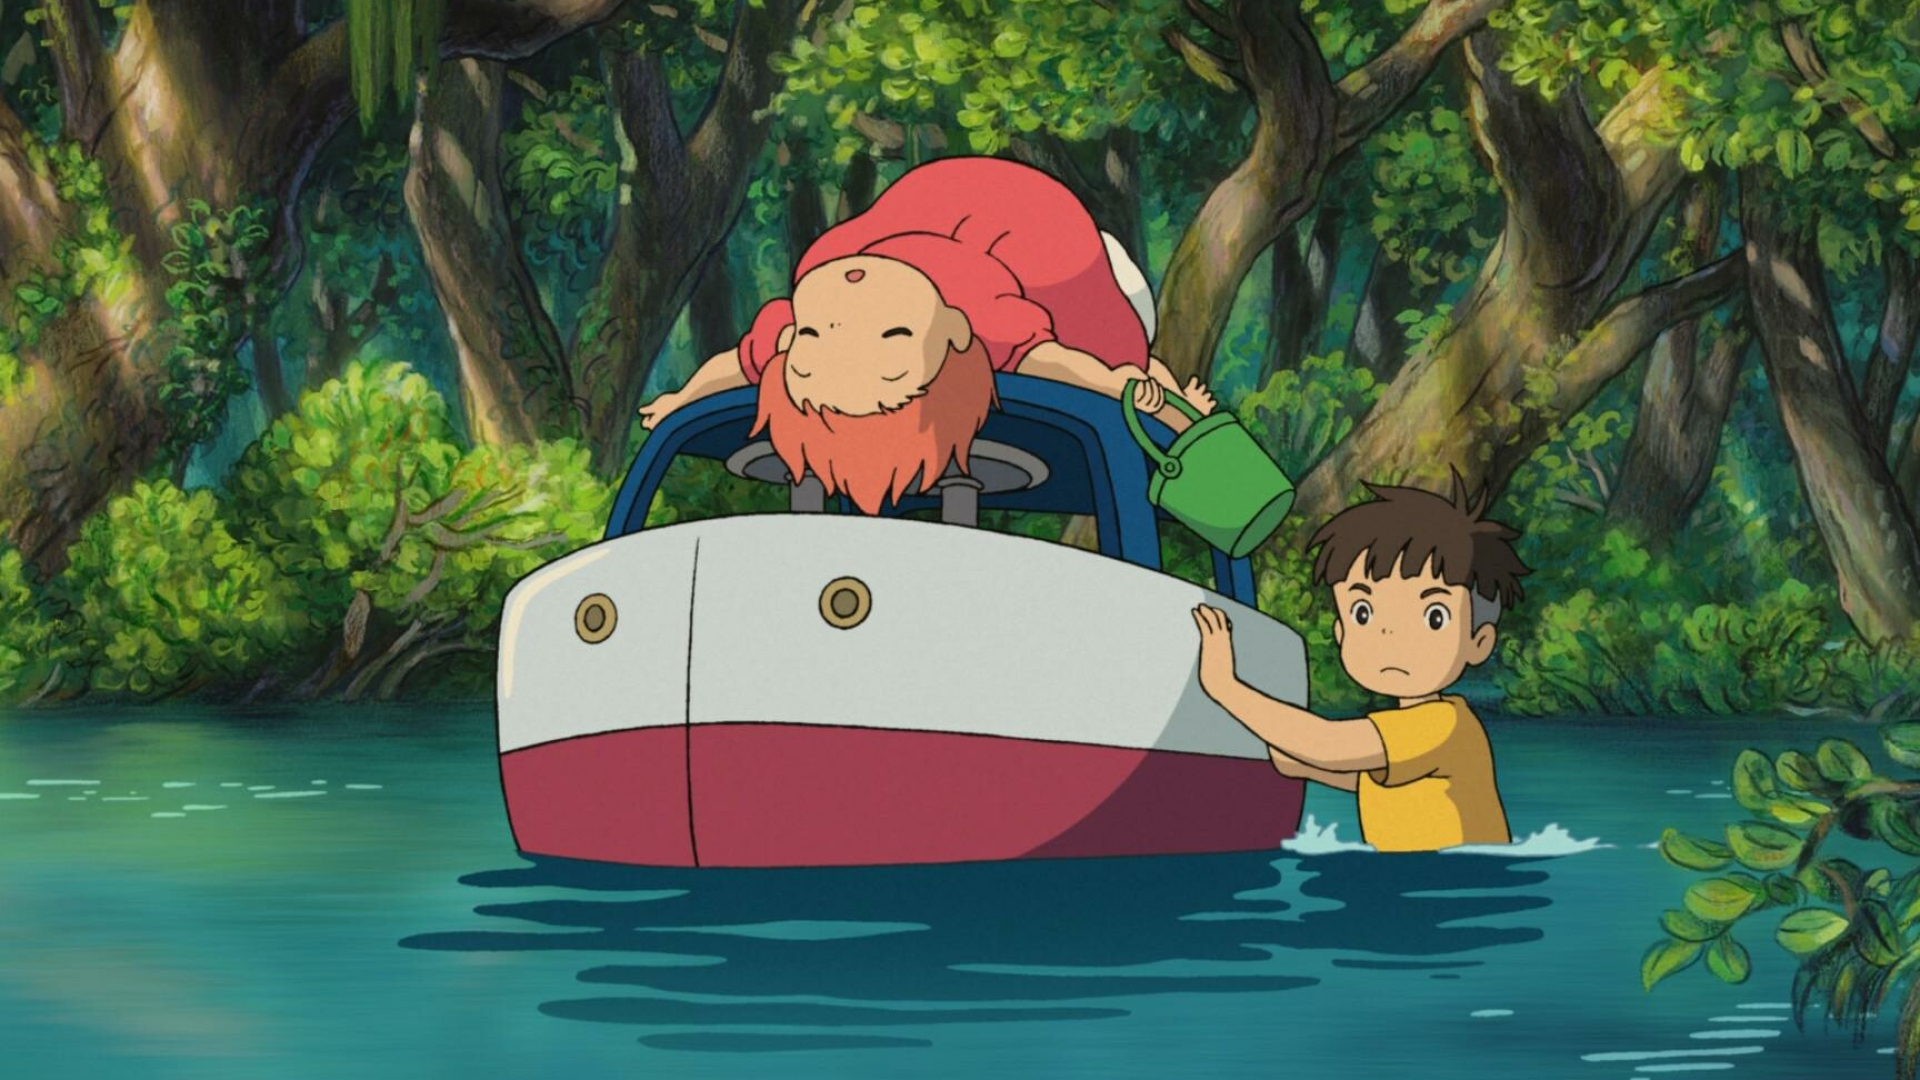 Ponyo: The story of friendship between five-year-old Sosuke and a magical goldfish, Anime. 1920x1080 Full HD Background.